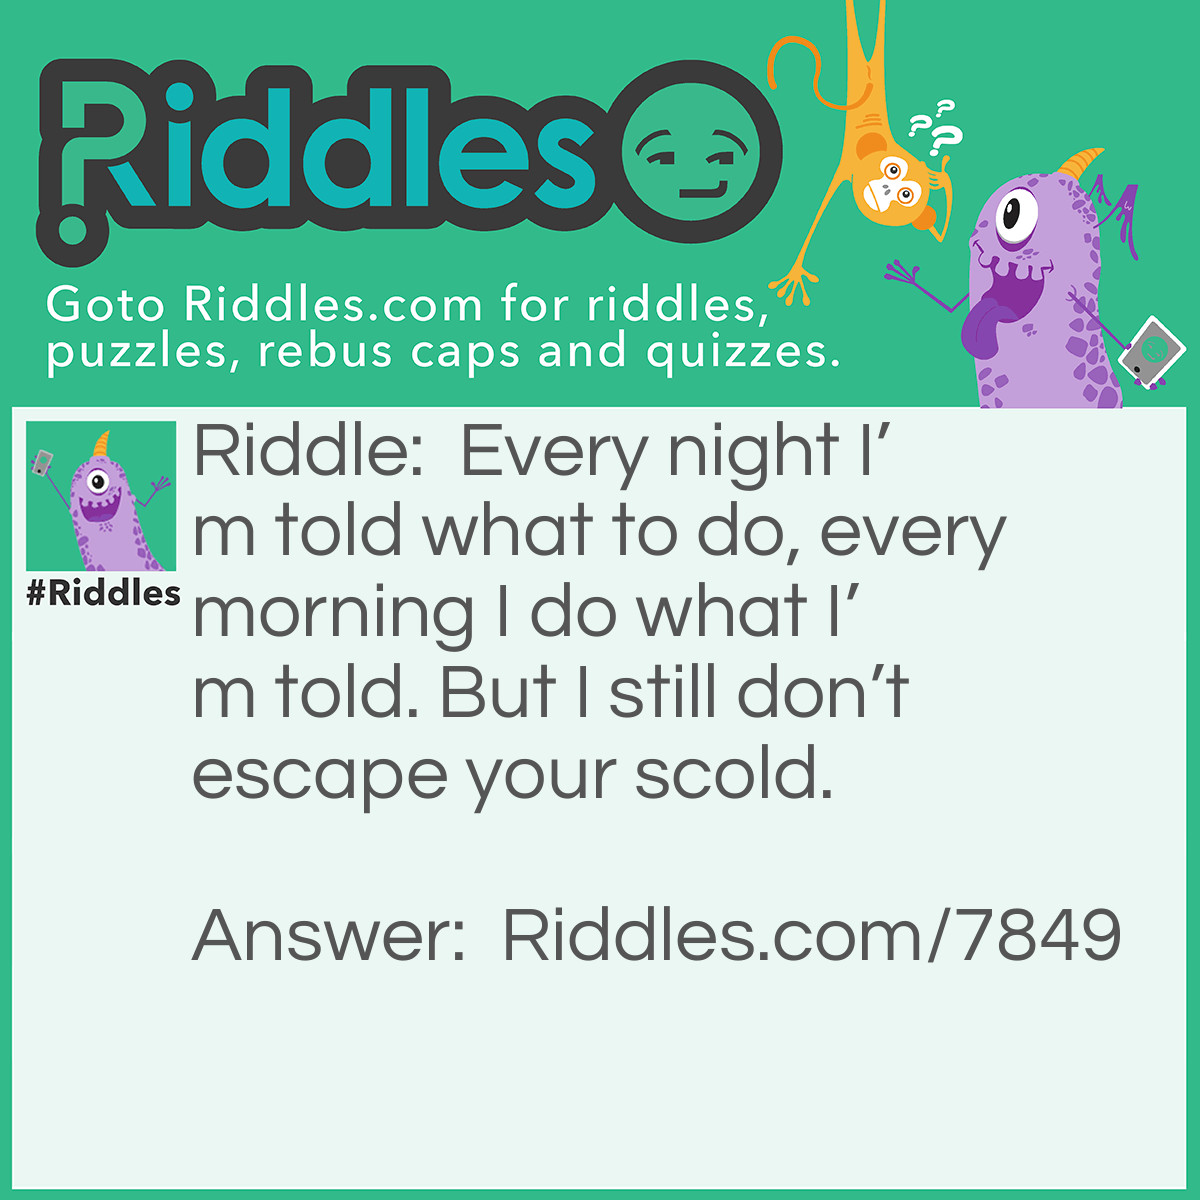 Riddle: Every night I'm told what to do, every morning I do what I'm told. But I still don't escape your scold. Answer: An Alarm Clock